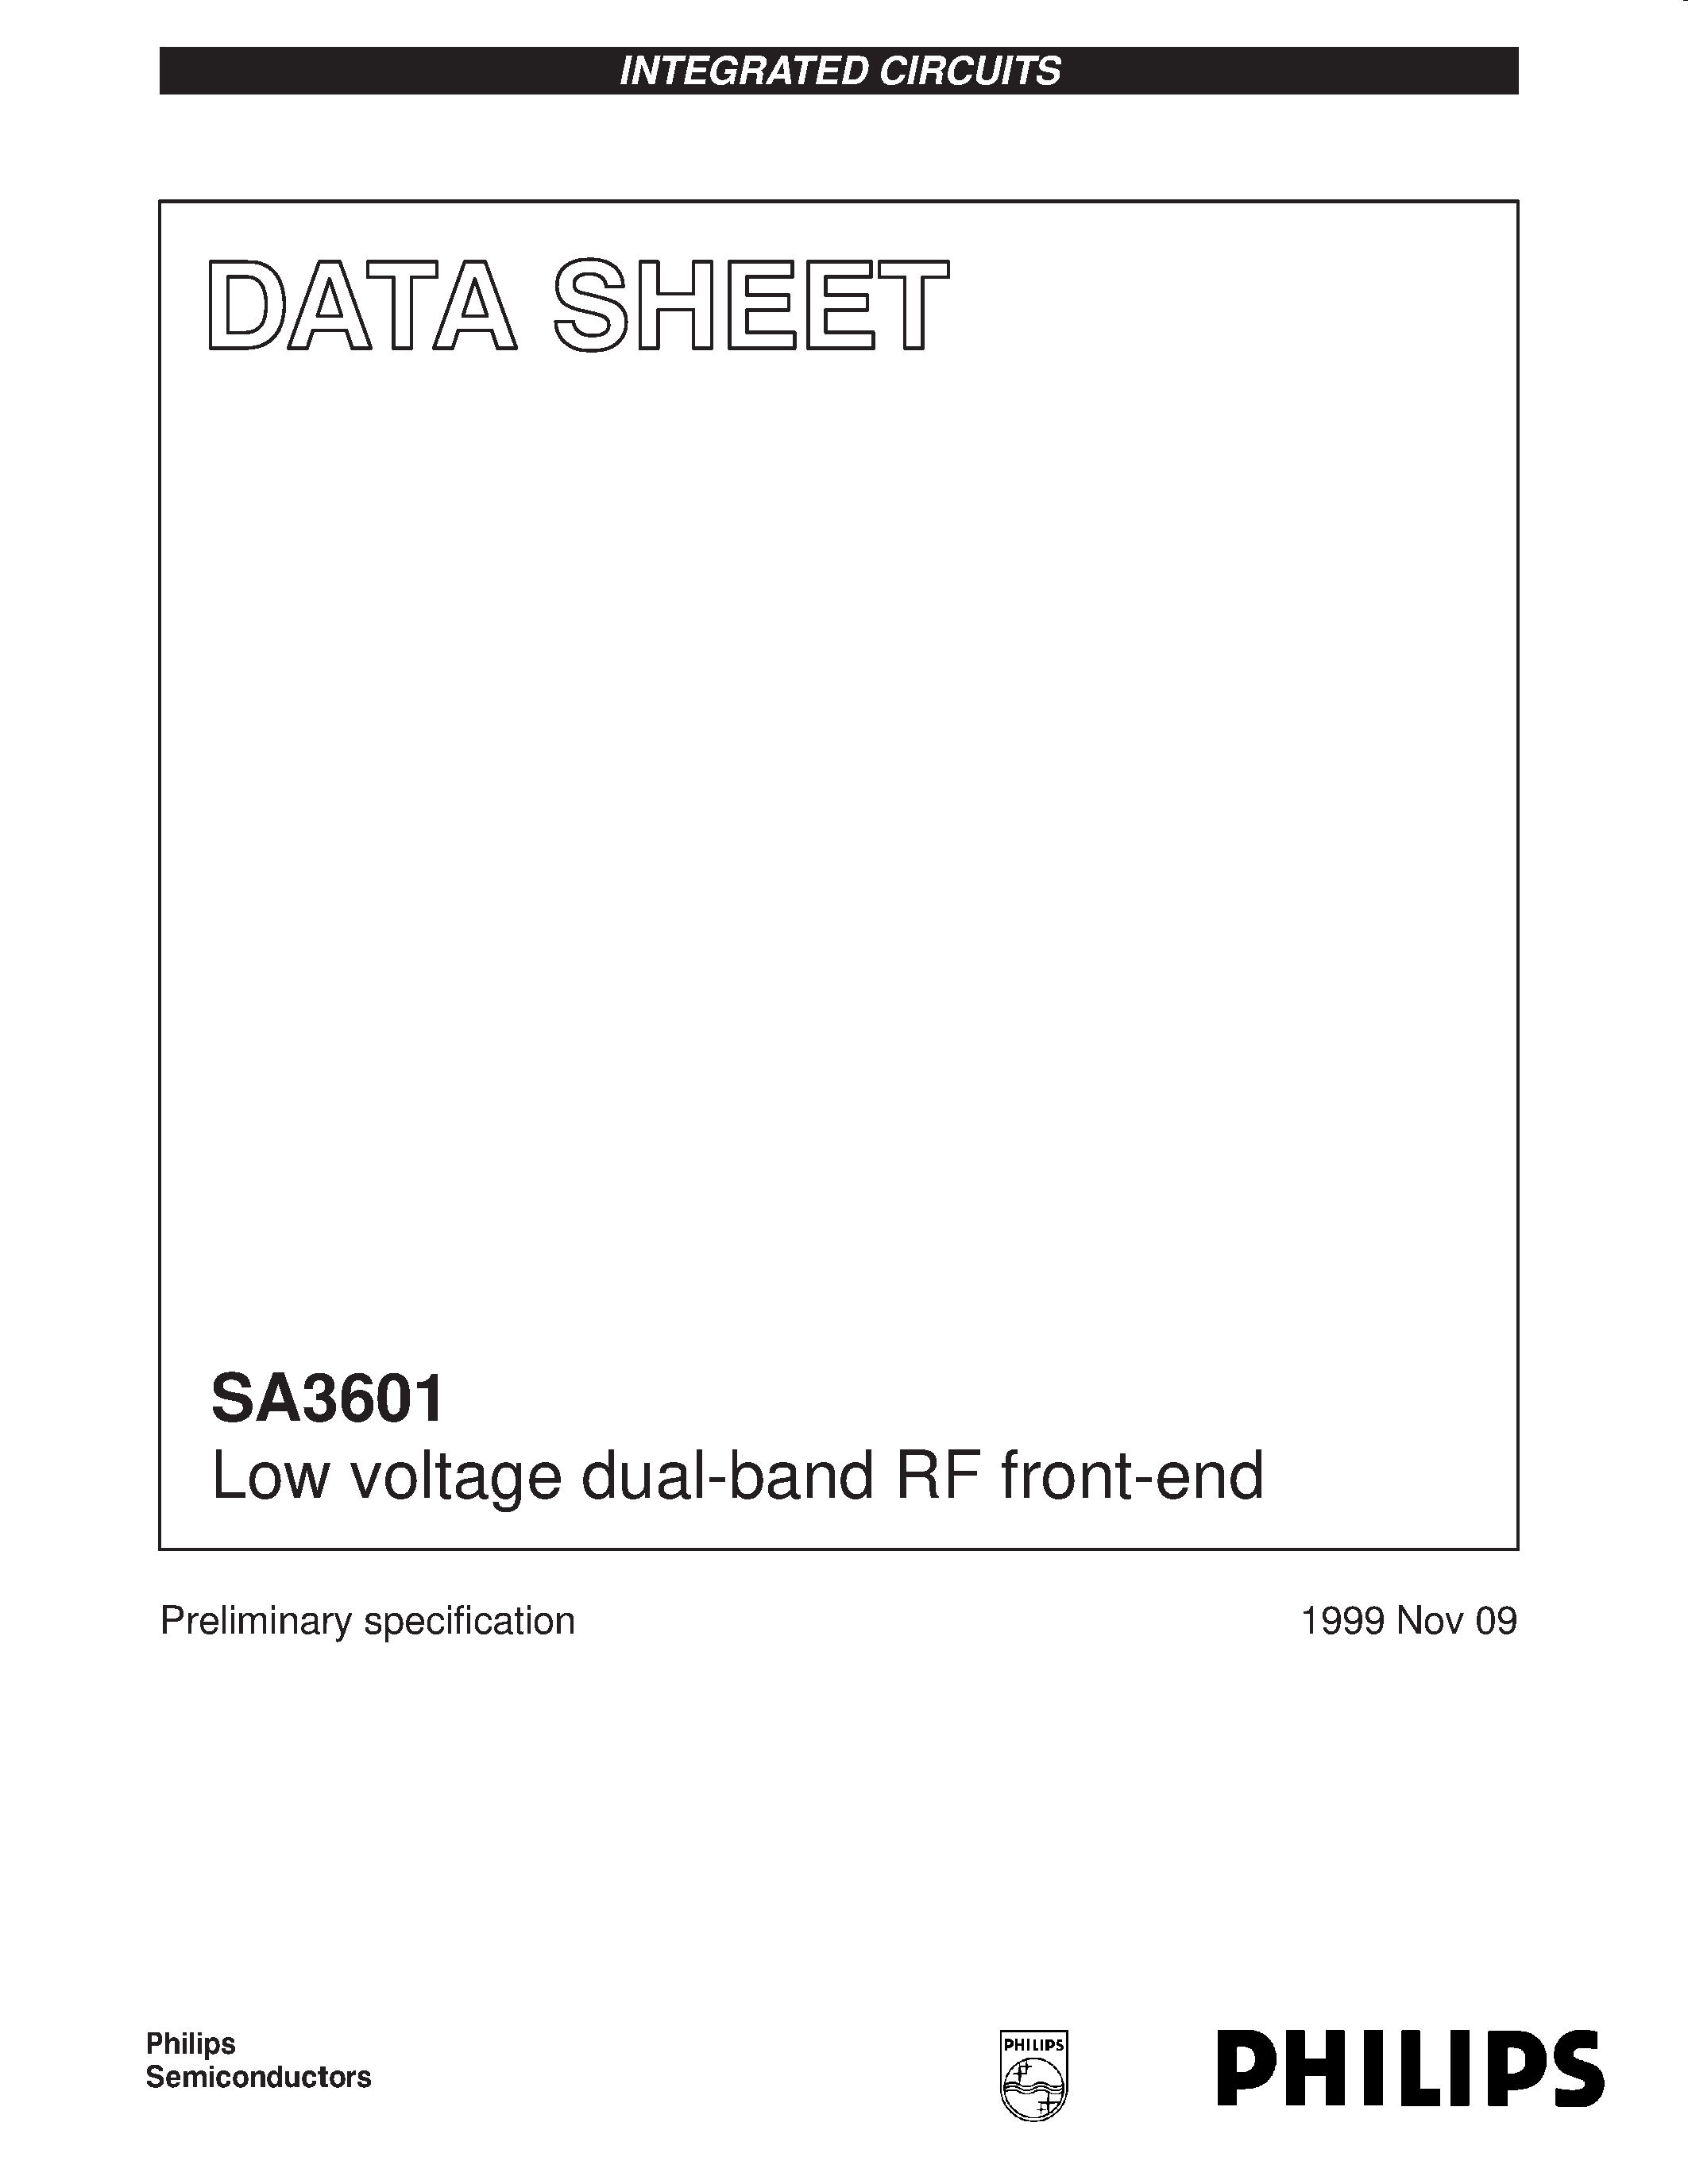 Datasheet SA3601 - Low voltage dual-band RF front-end page 1